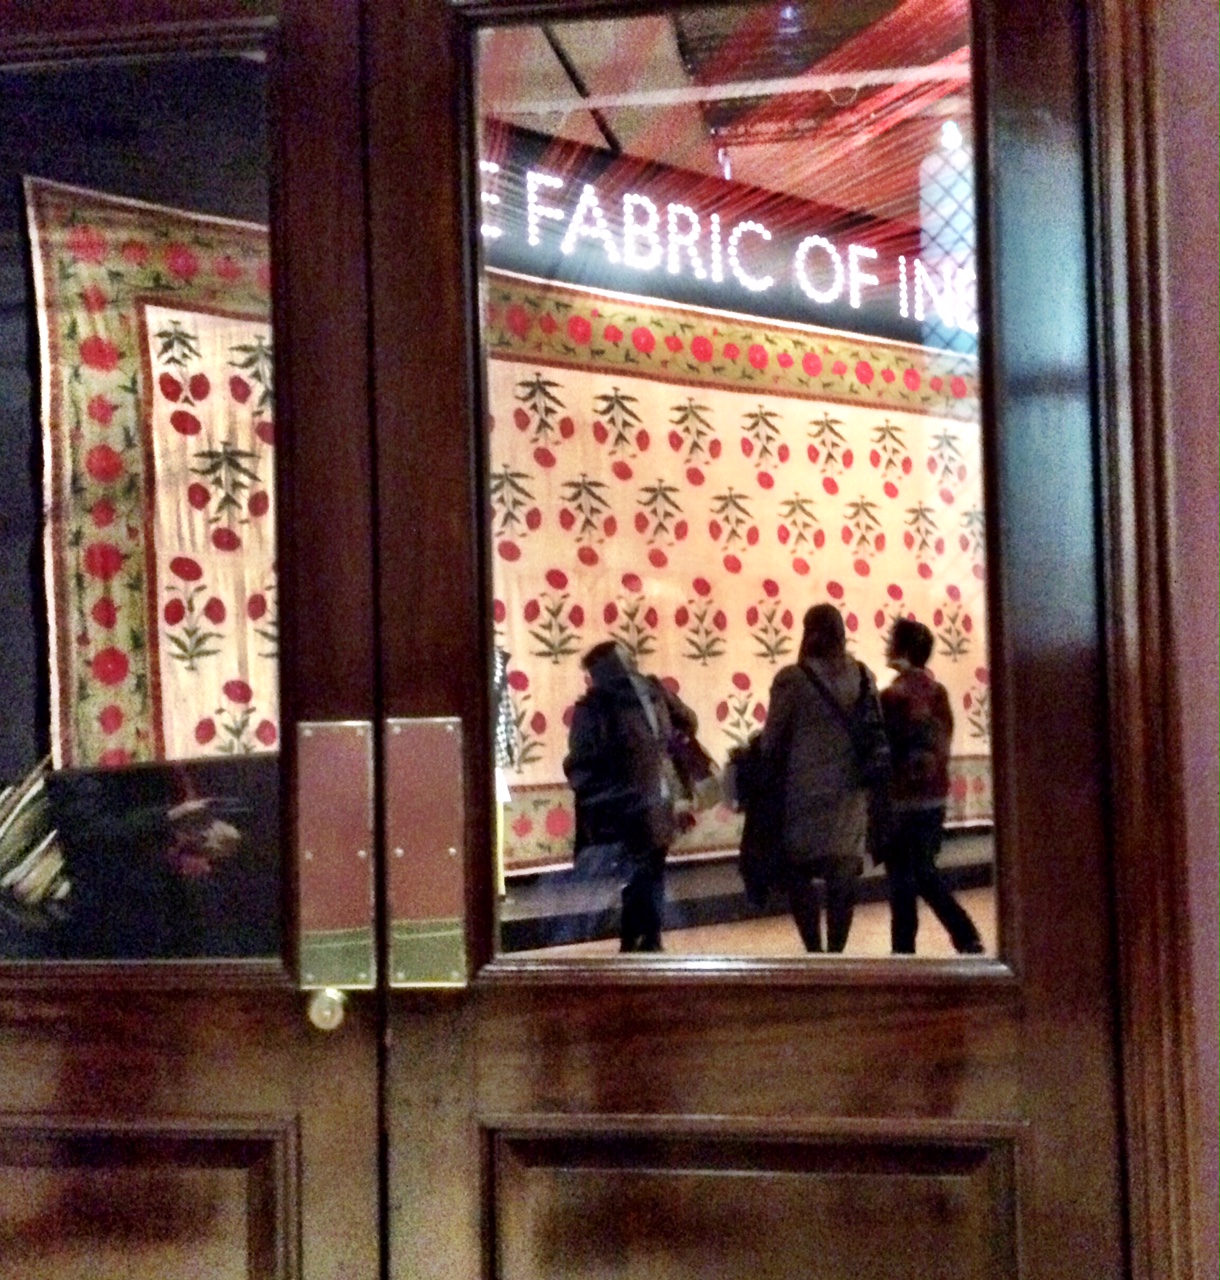 The Fabric of India exhibition at the Victoria and Albert Museum London Jan 2016